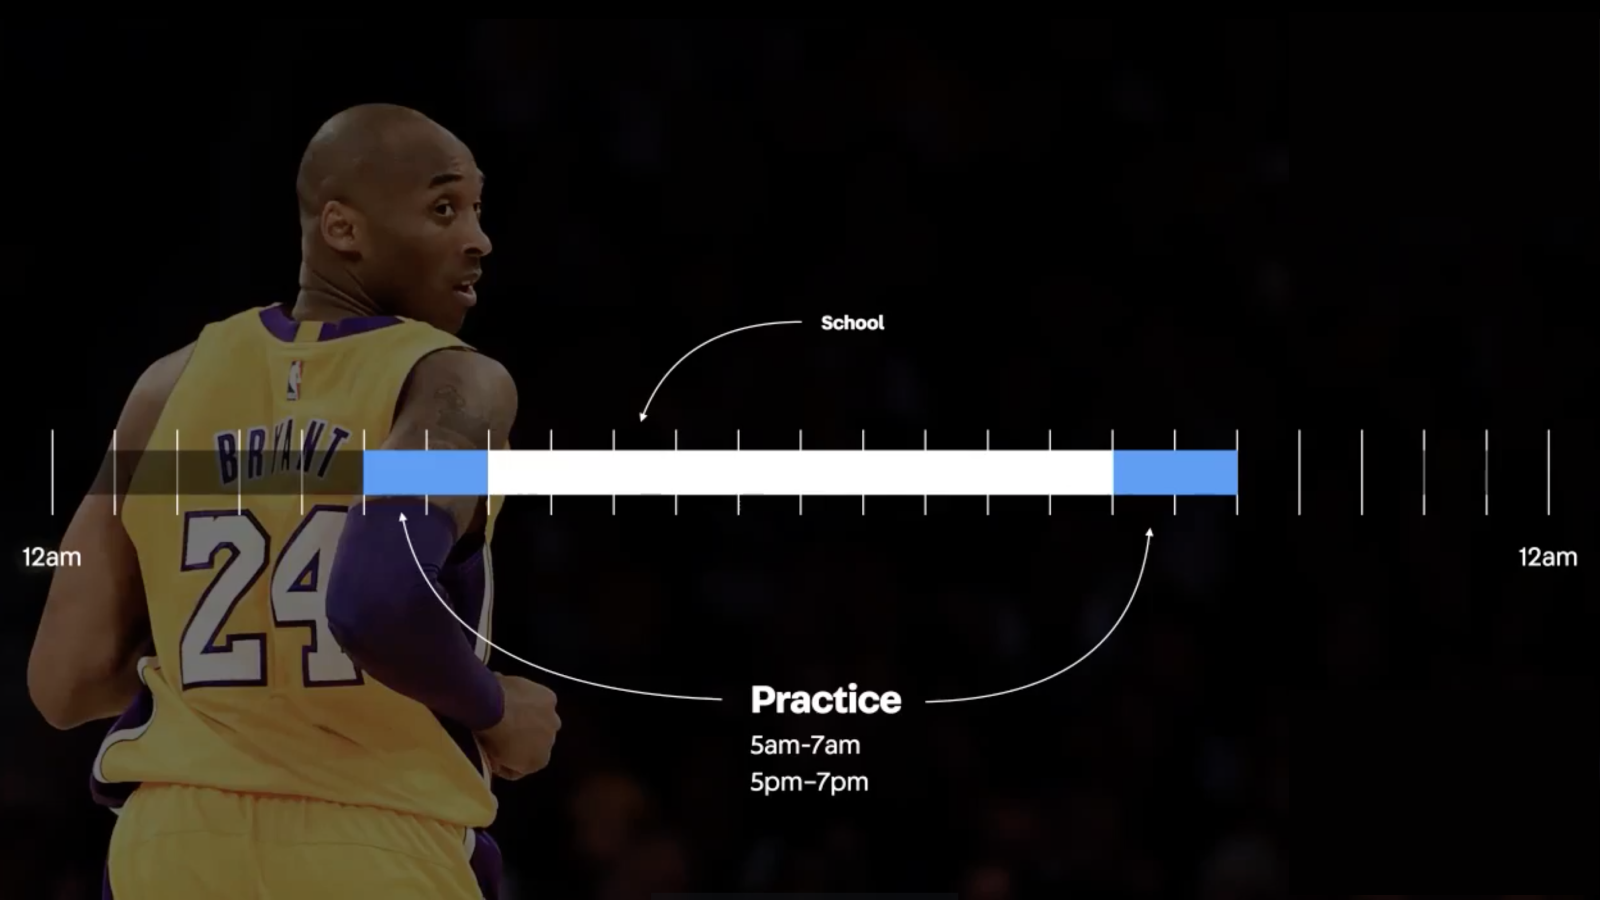 Kobe Bryant&rsquo;s high school practice schedule: 2 hours of practice before and after school